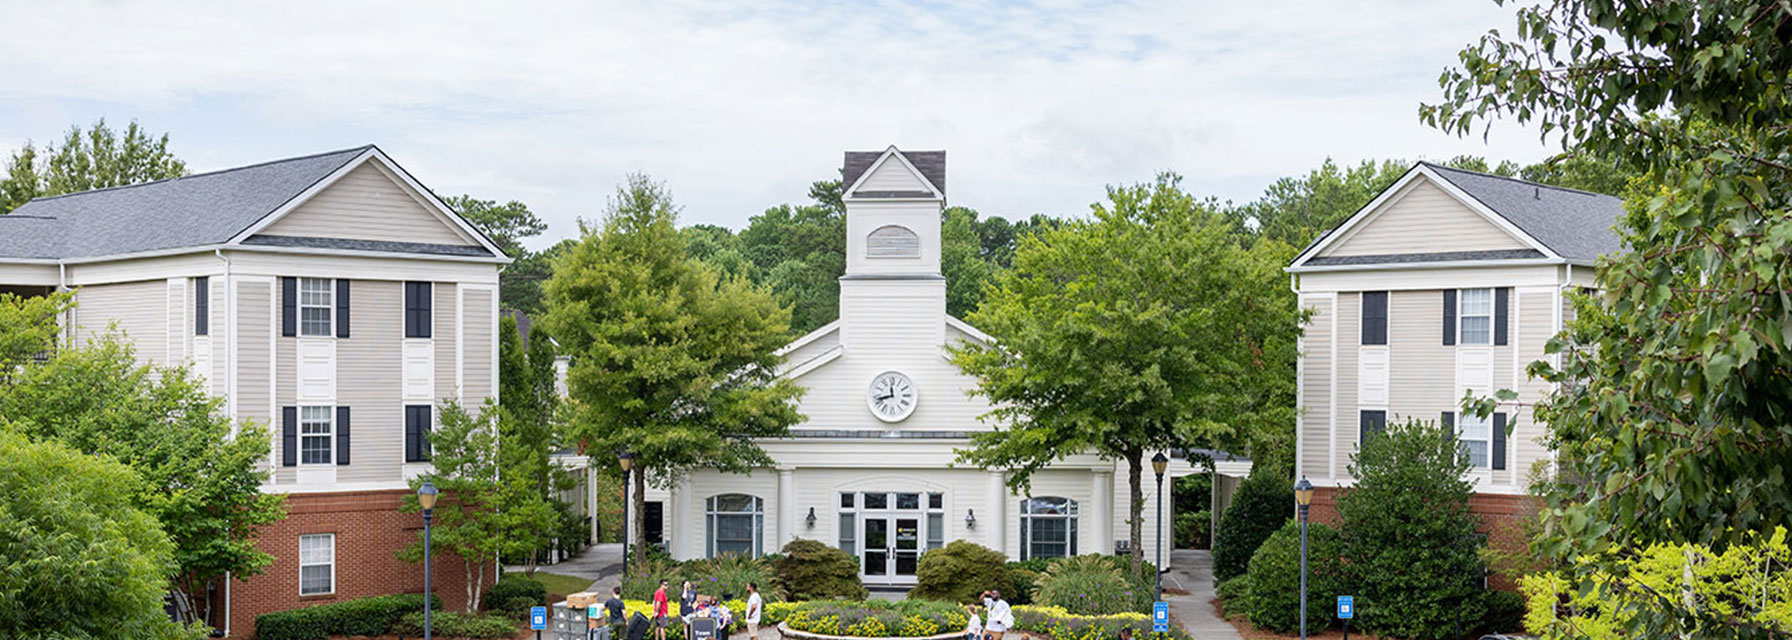 Exterior of ARC Town Hall on the Kennesaw Campus